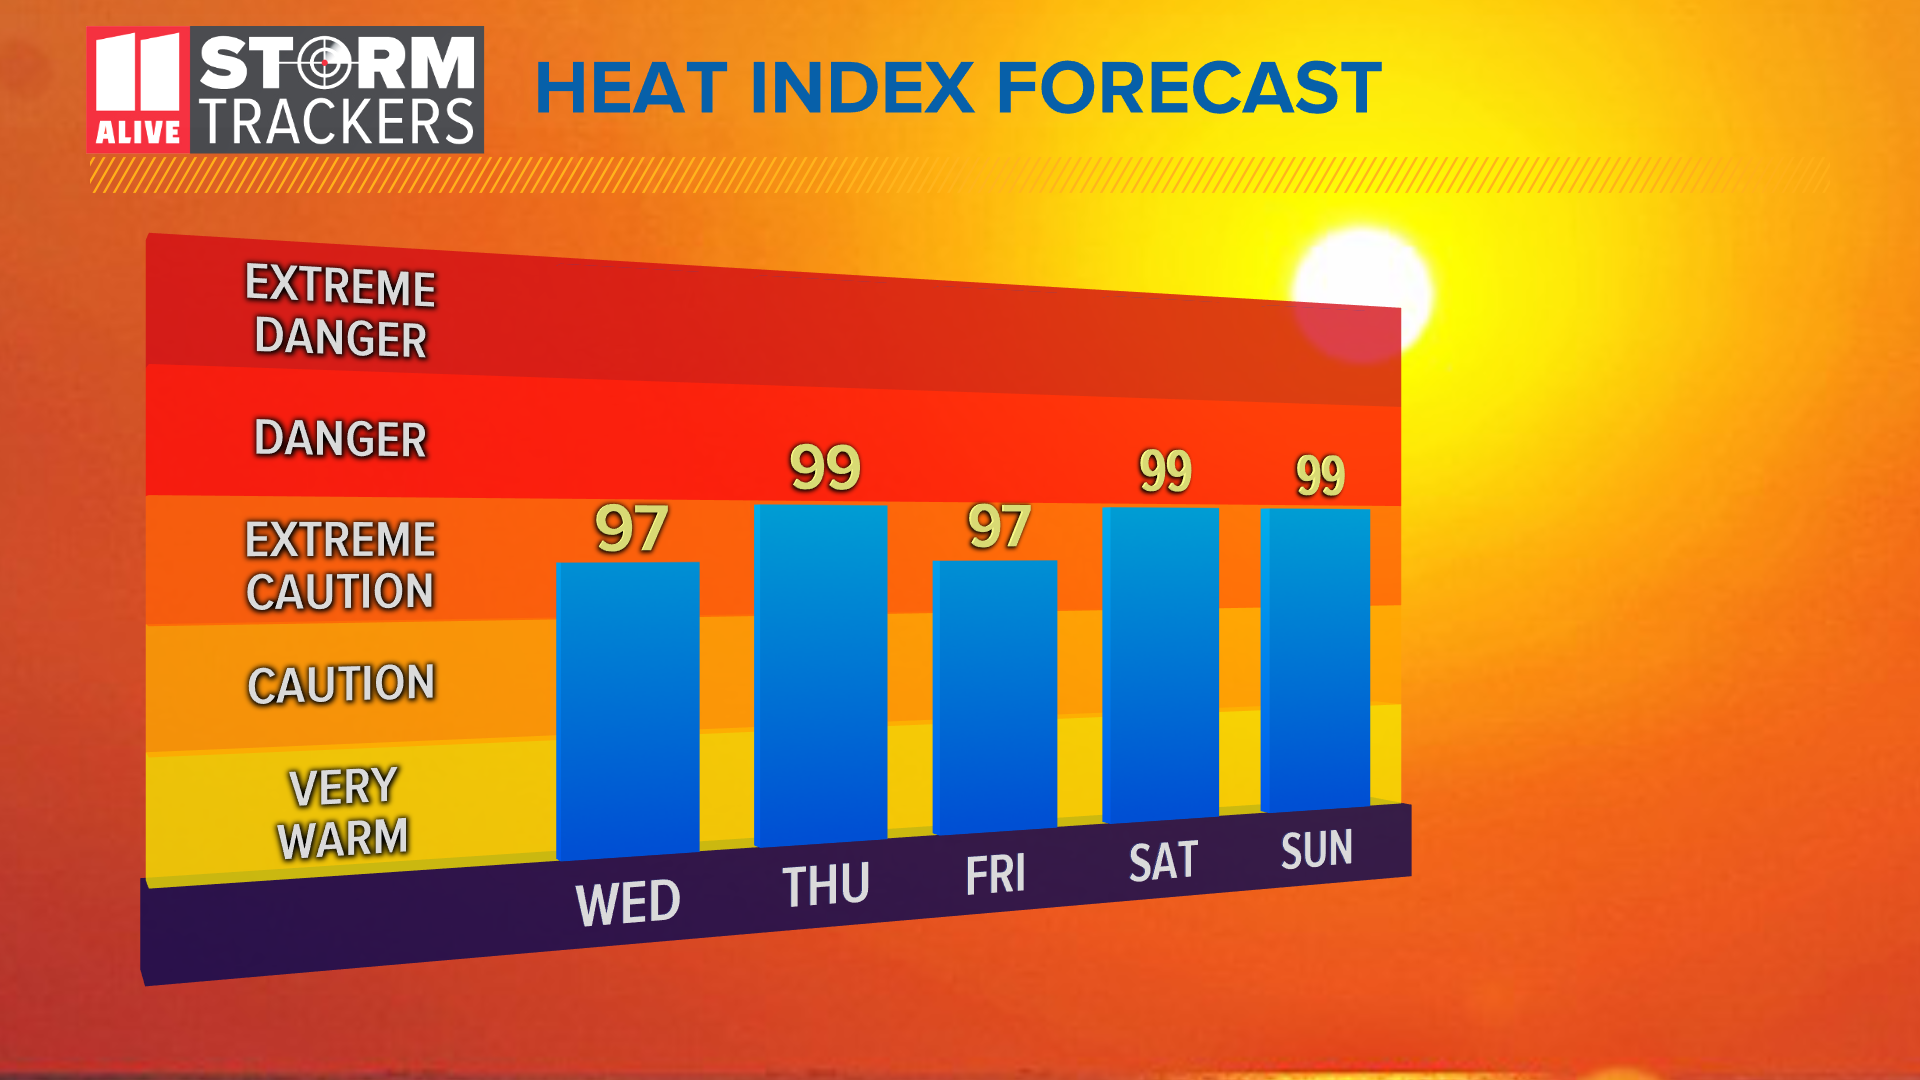 Hot, humid with afternoon storms for the next week at least